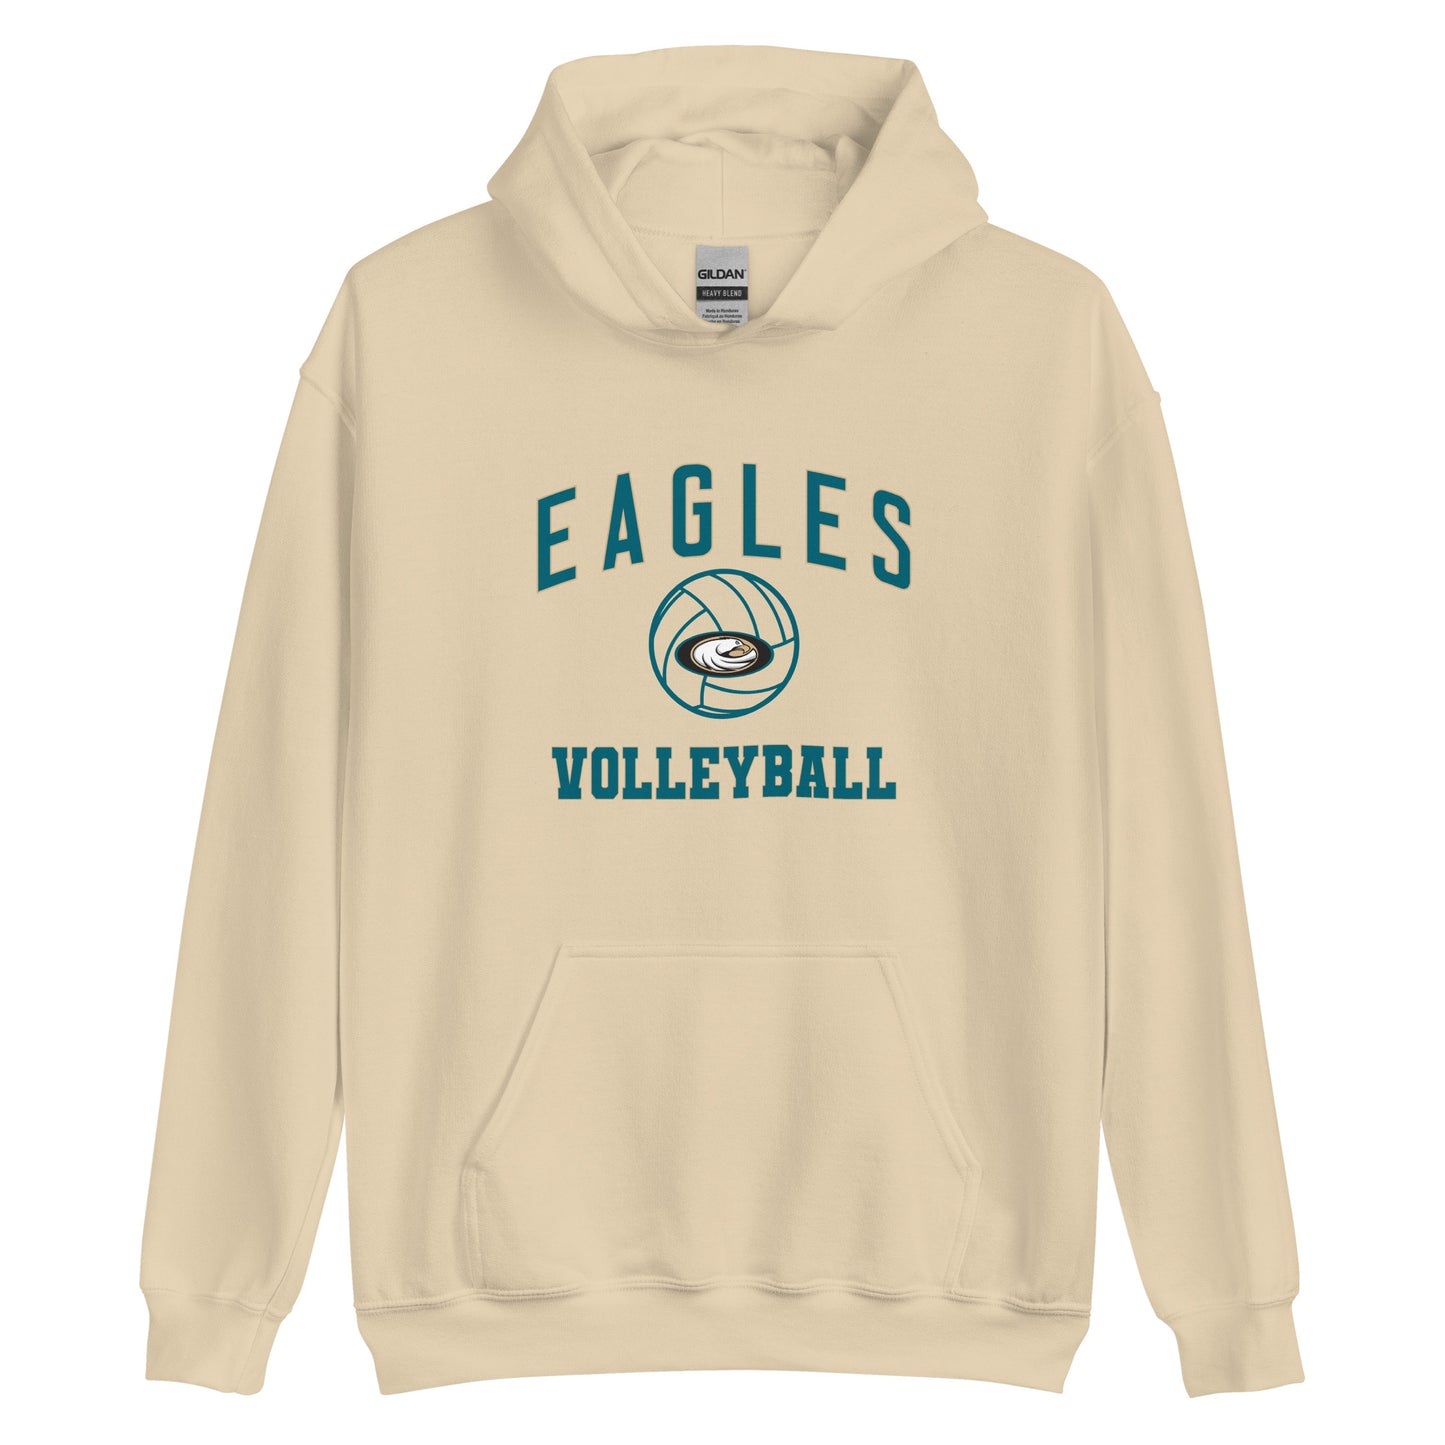 Eagles Volleyball Unisex Hoodie